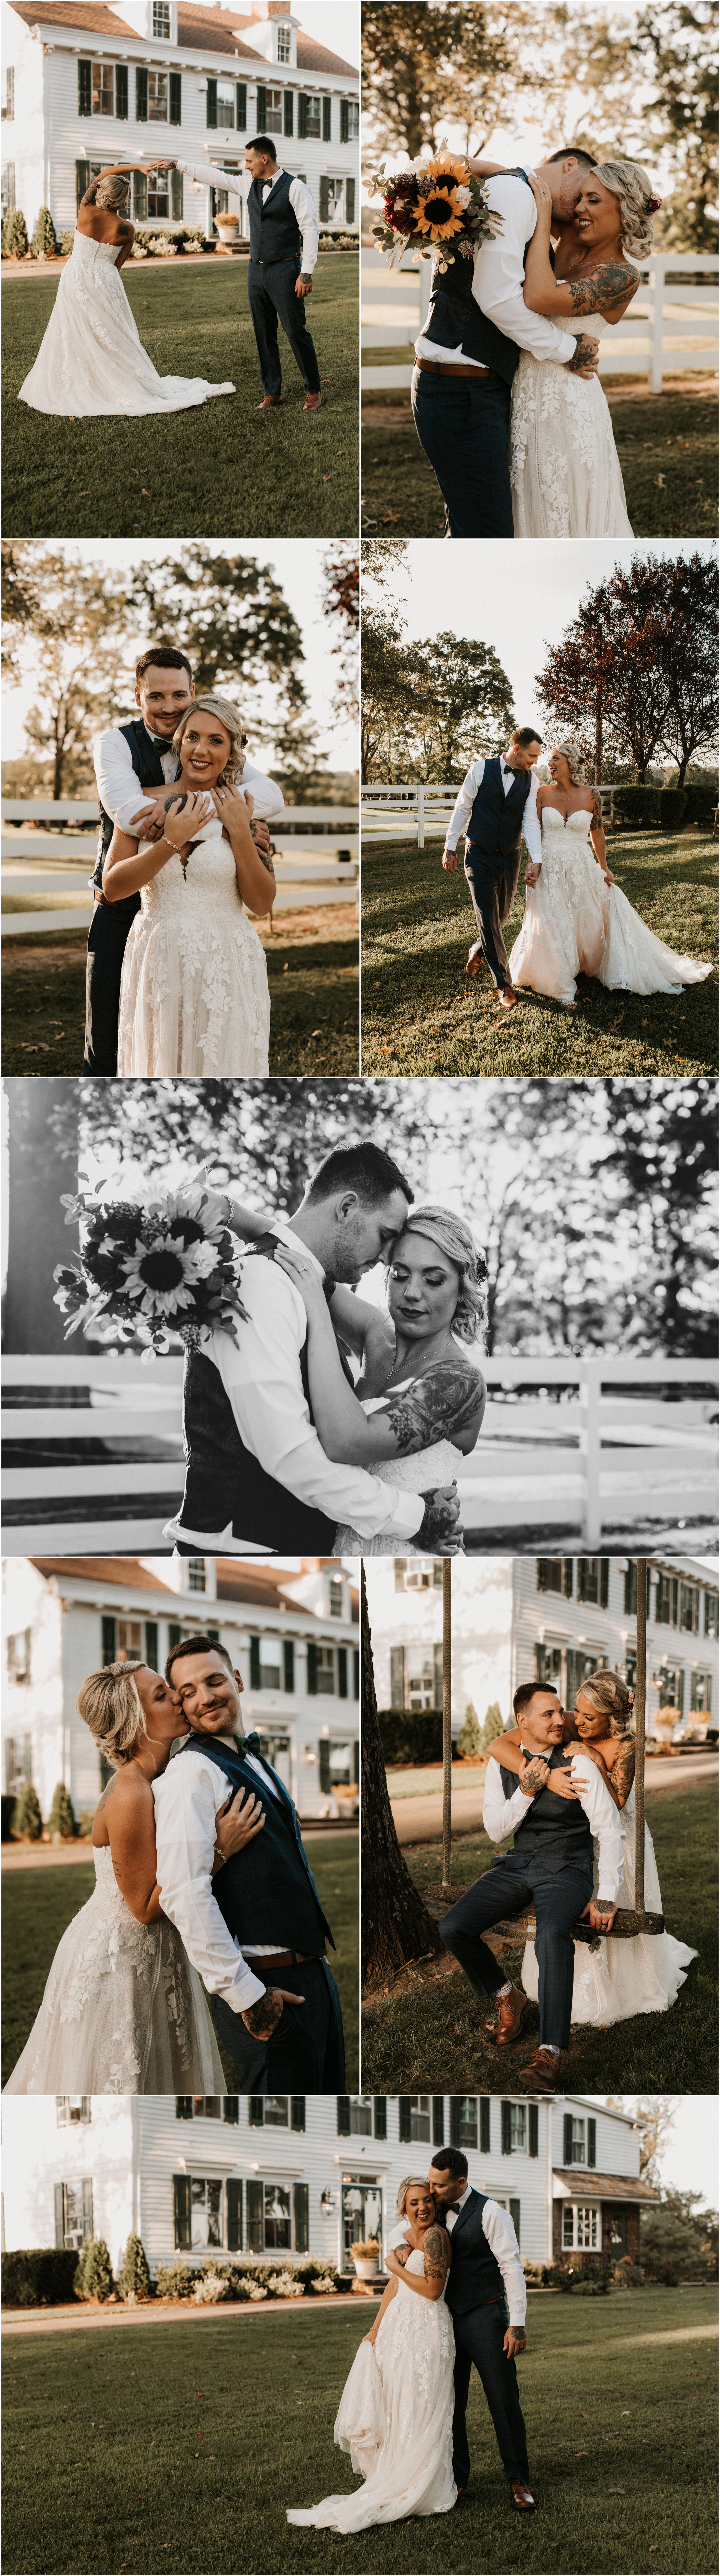 bride and groom portraits at sunset on farm